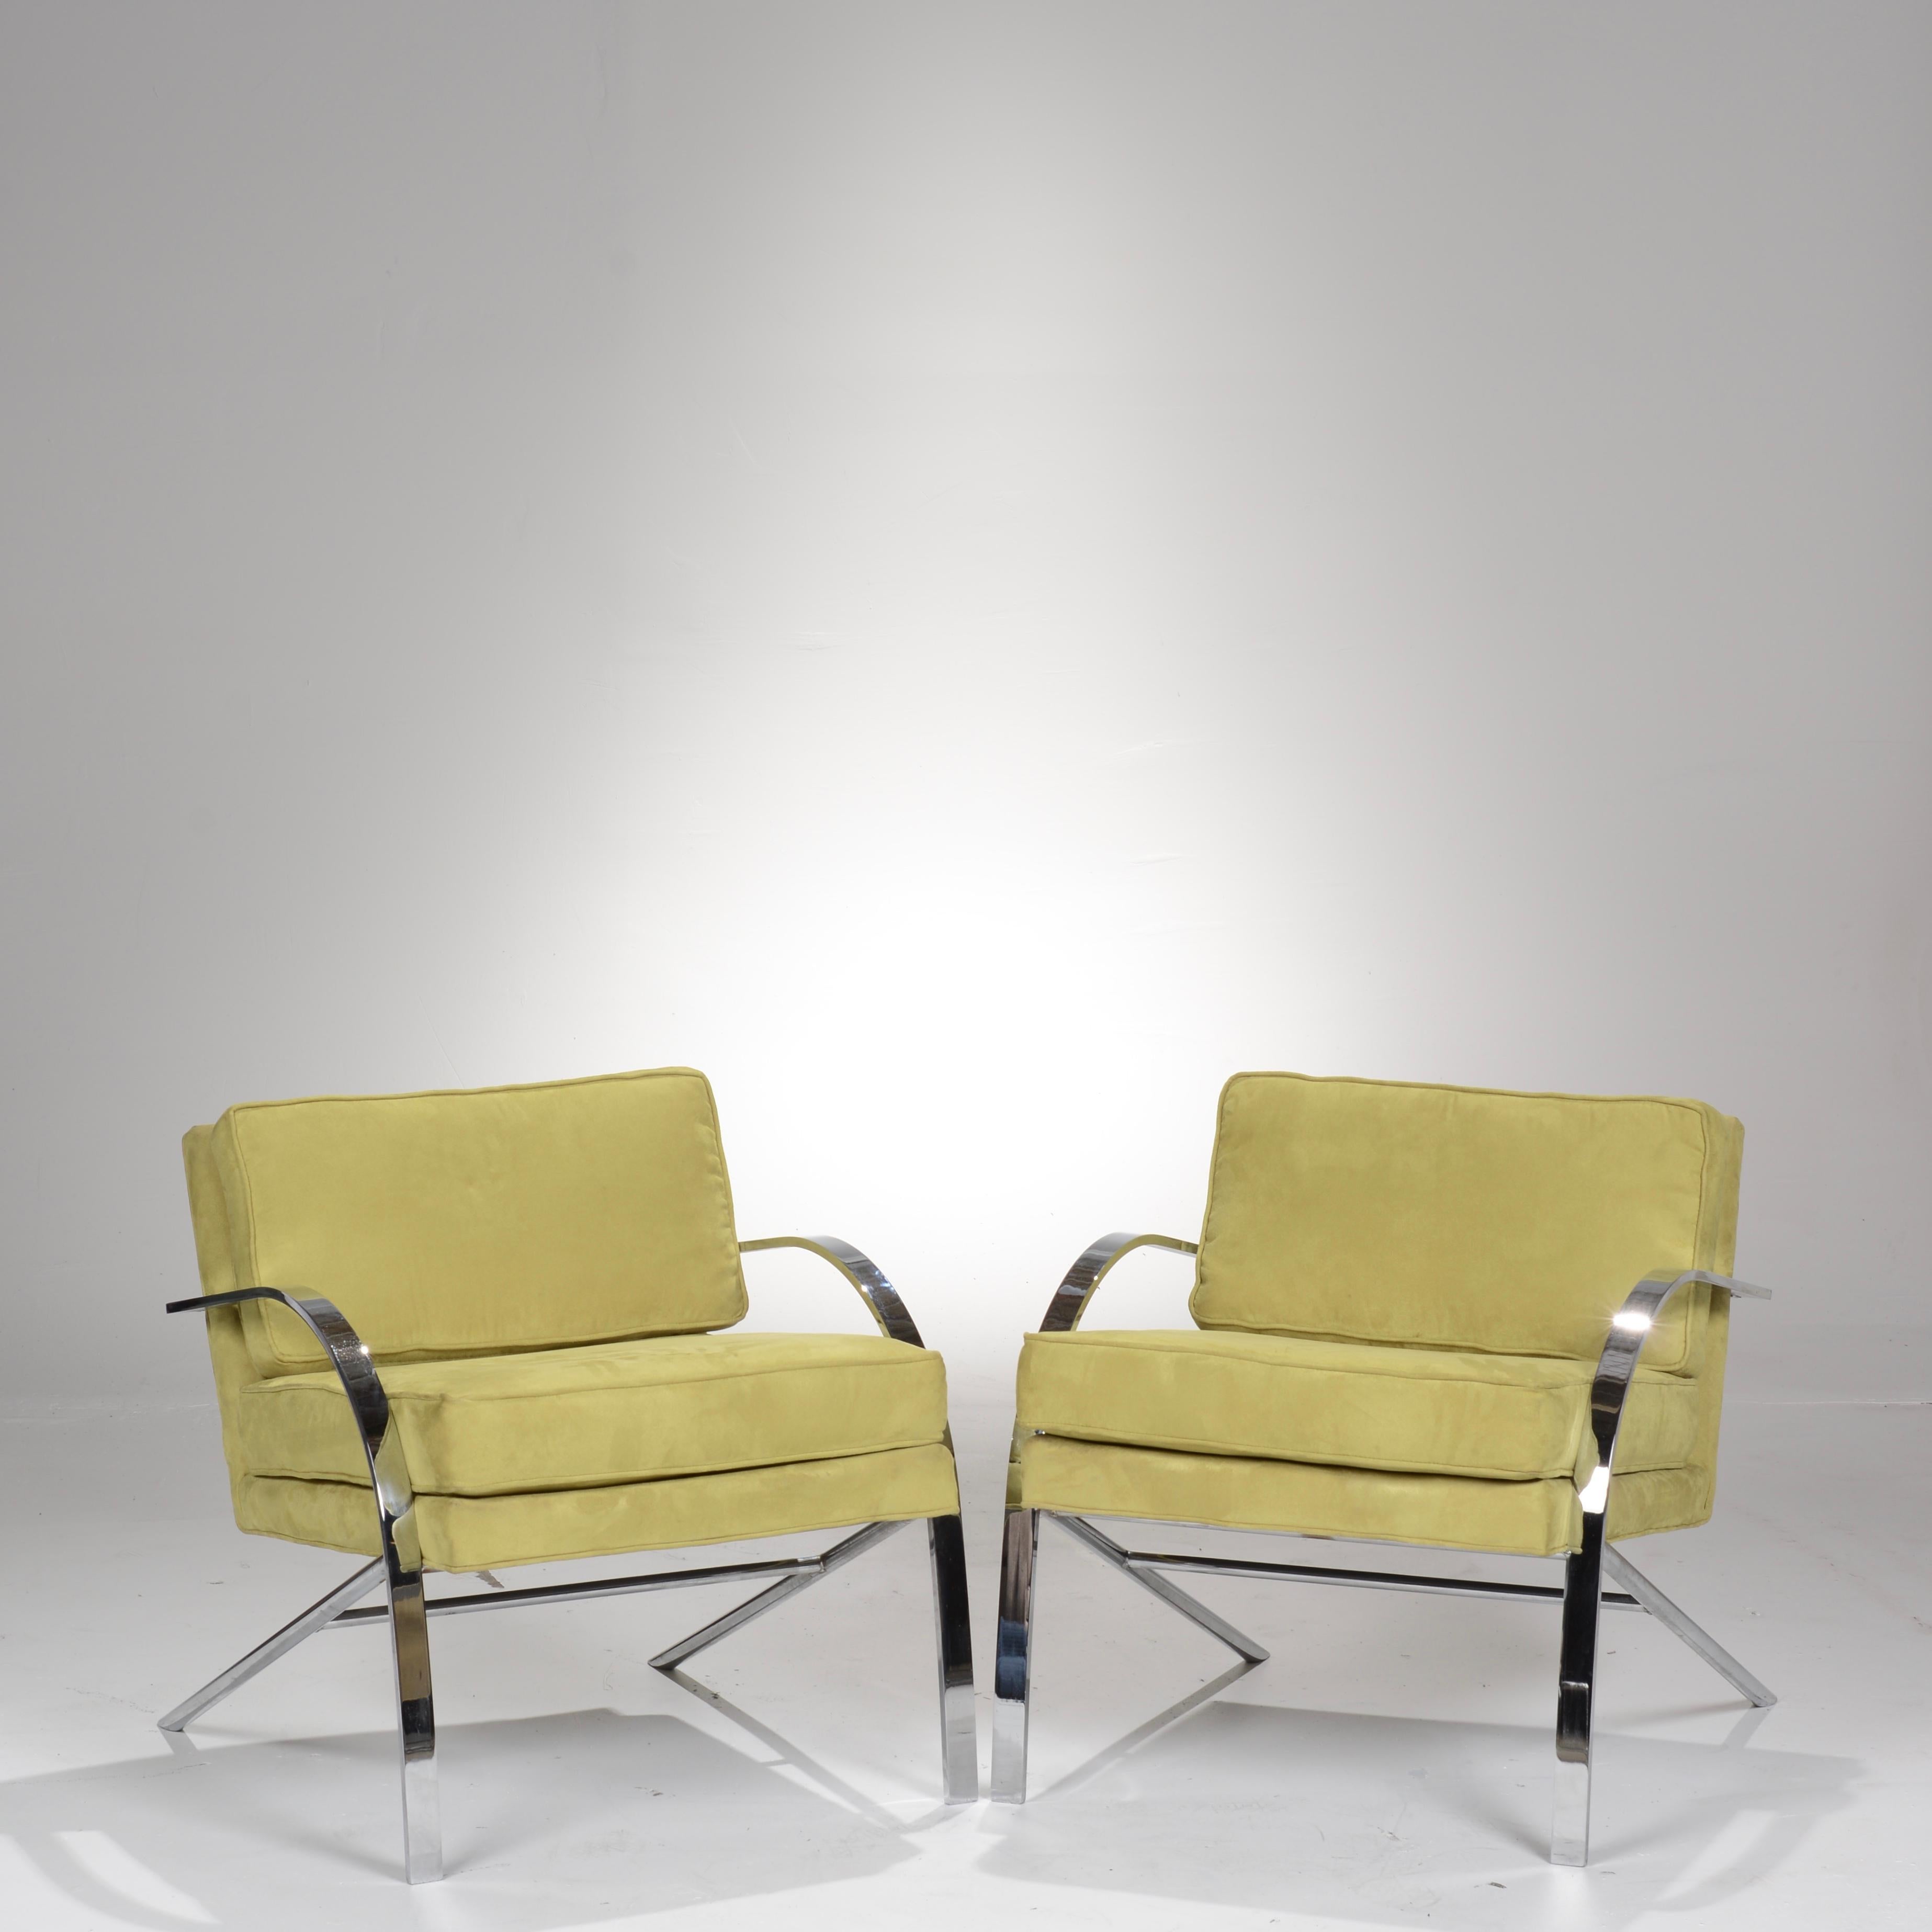 Stunning pair stainless steel lounge chairs by Paul Tuttle. Upholstered in green suede leather.

 All items are viewable at our Downtown Los Angeles warehouse. 